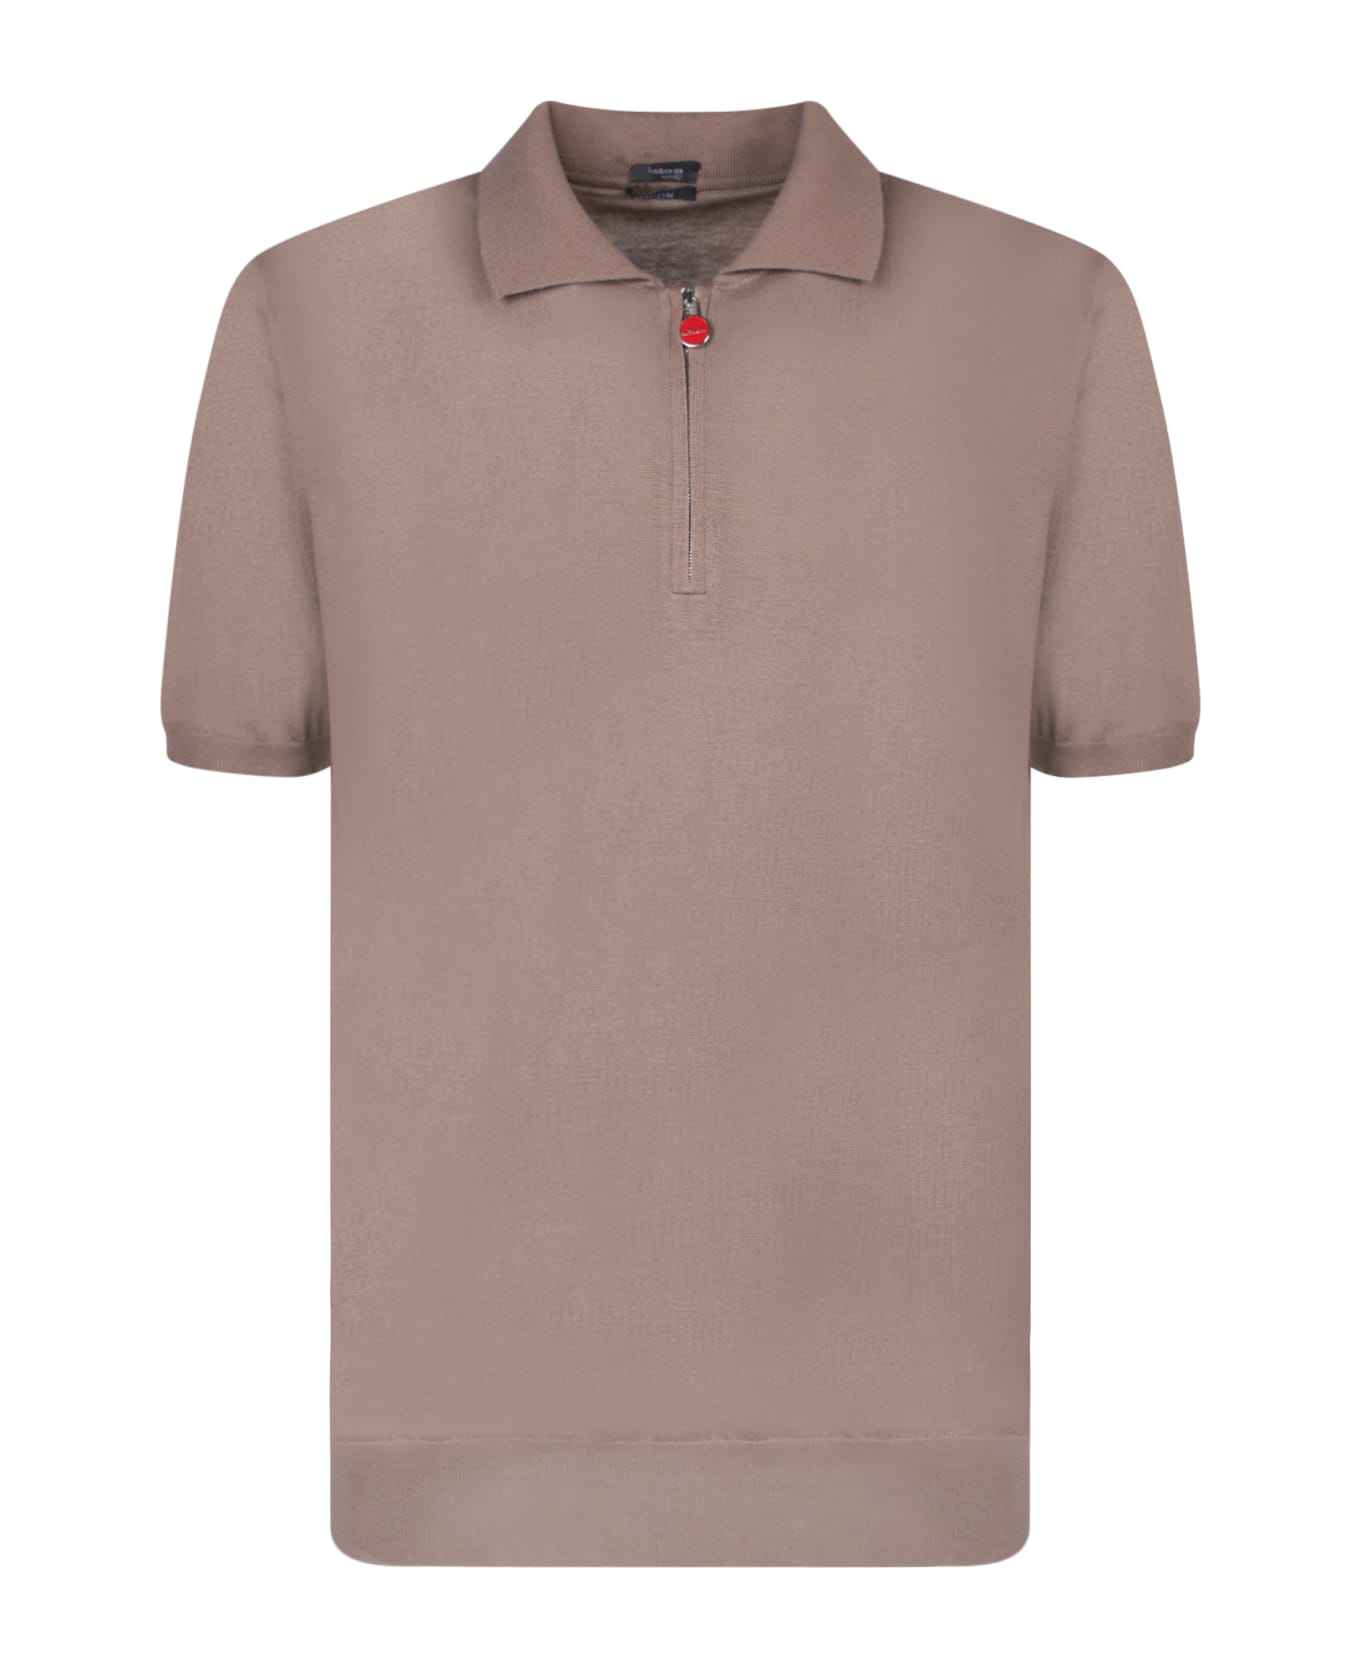 Kiton Iconic Mid Zip Taupe Polo Shirt - Beige